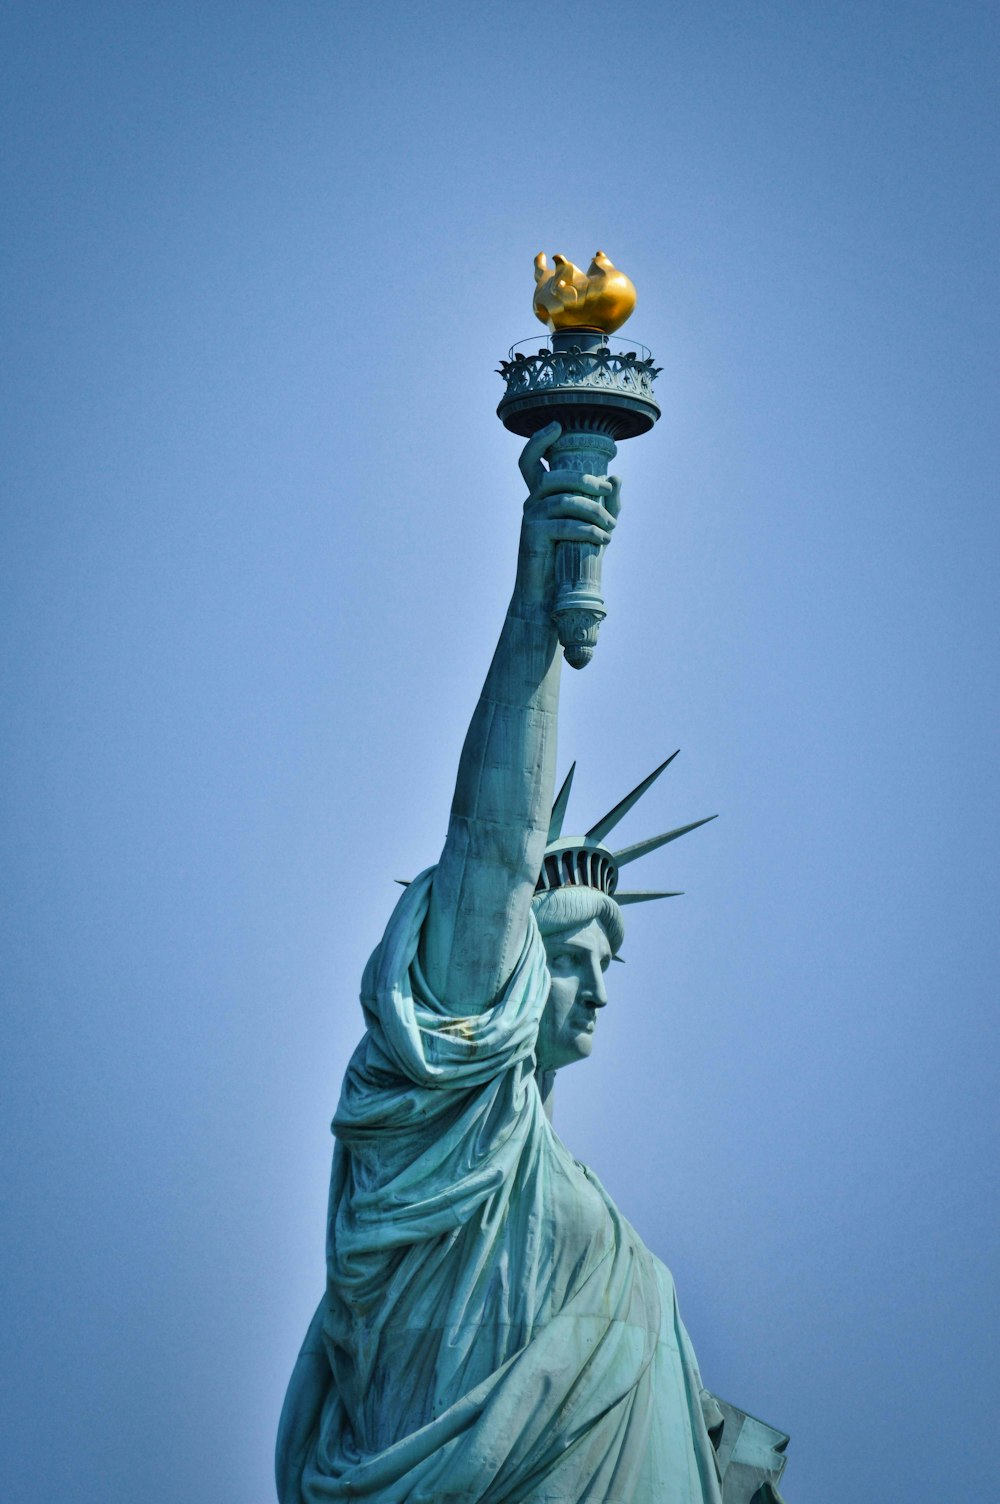 the statue of liberty has a golden crown on top of it